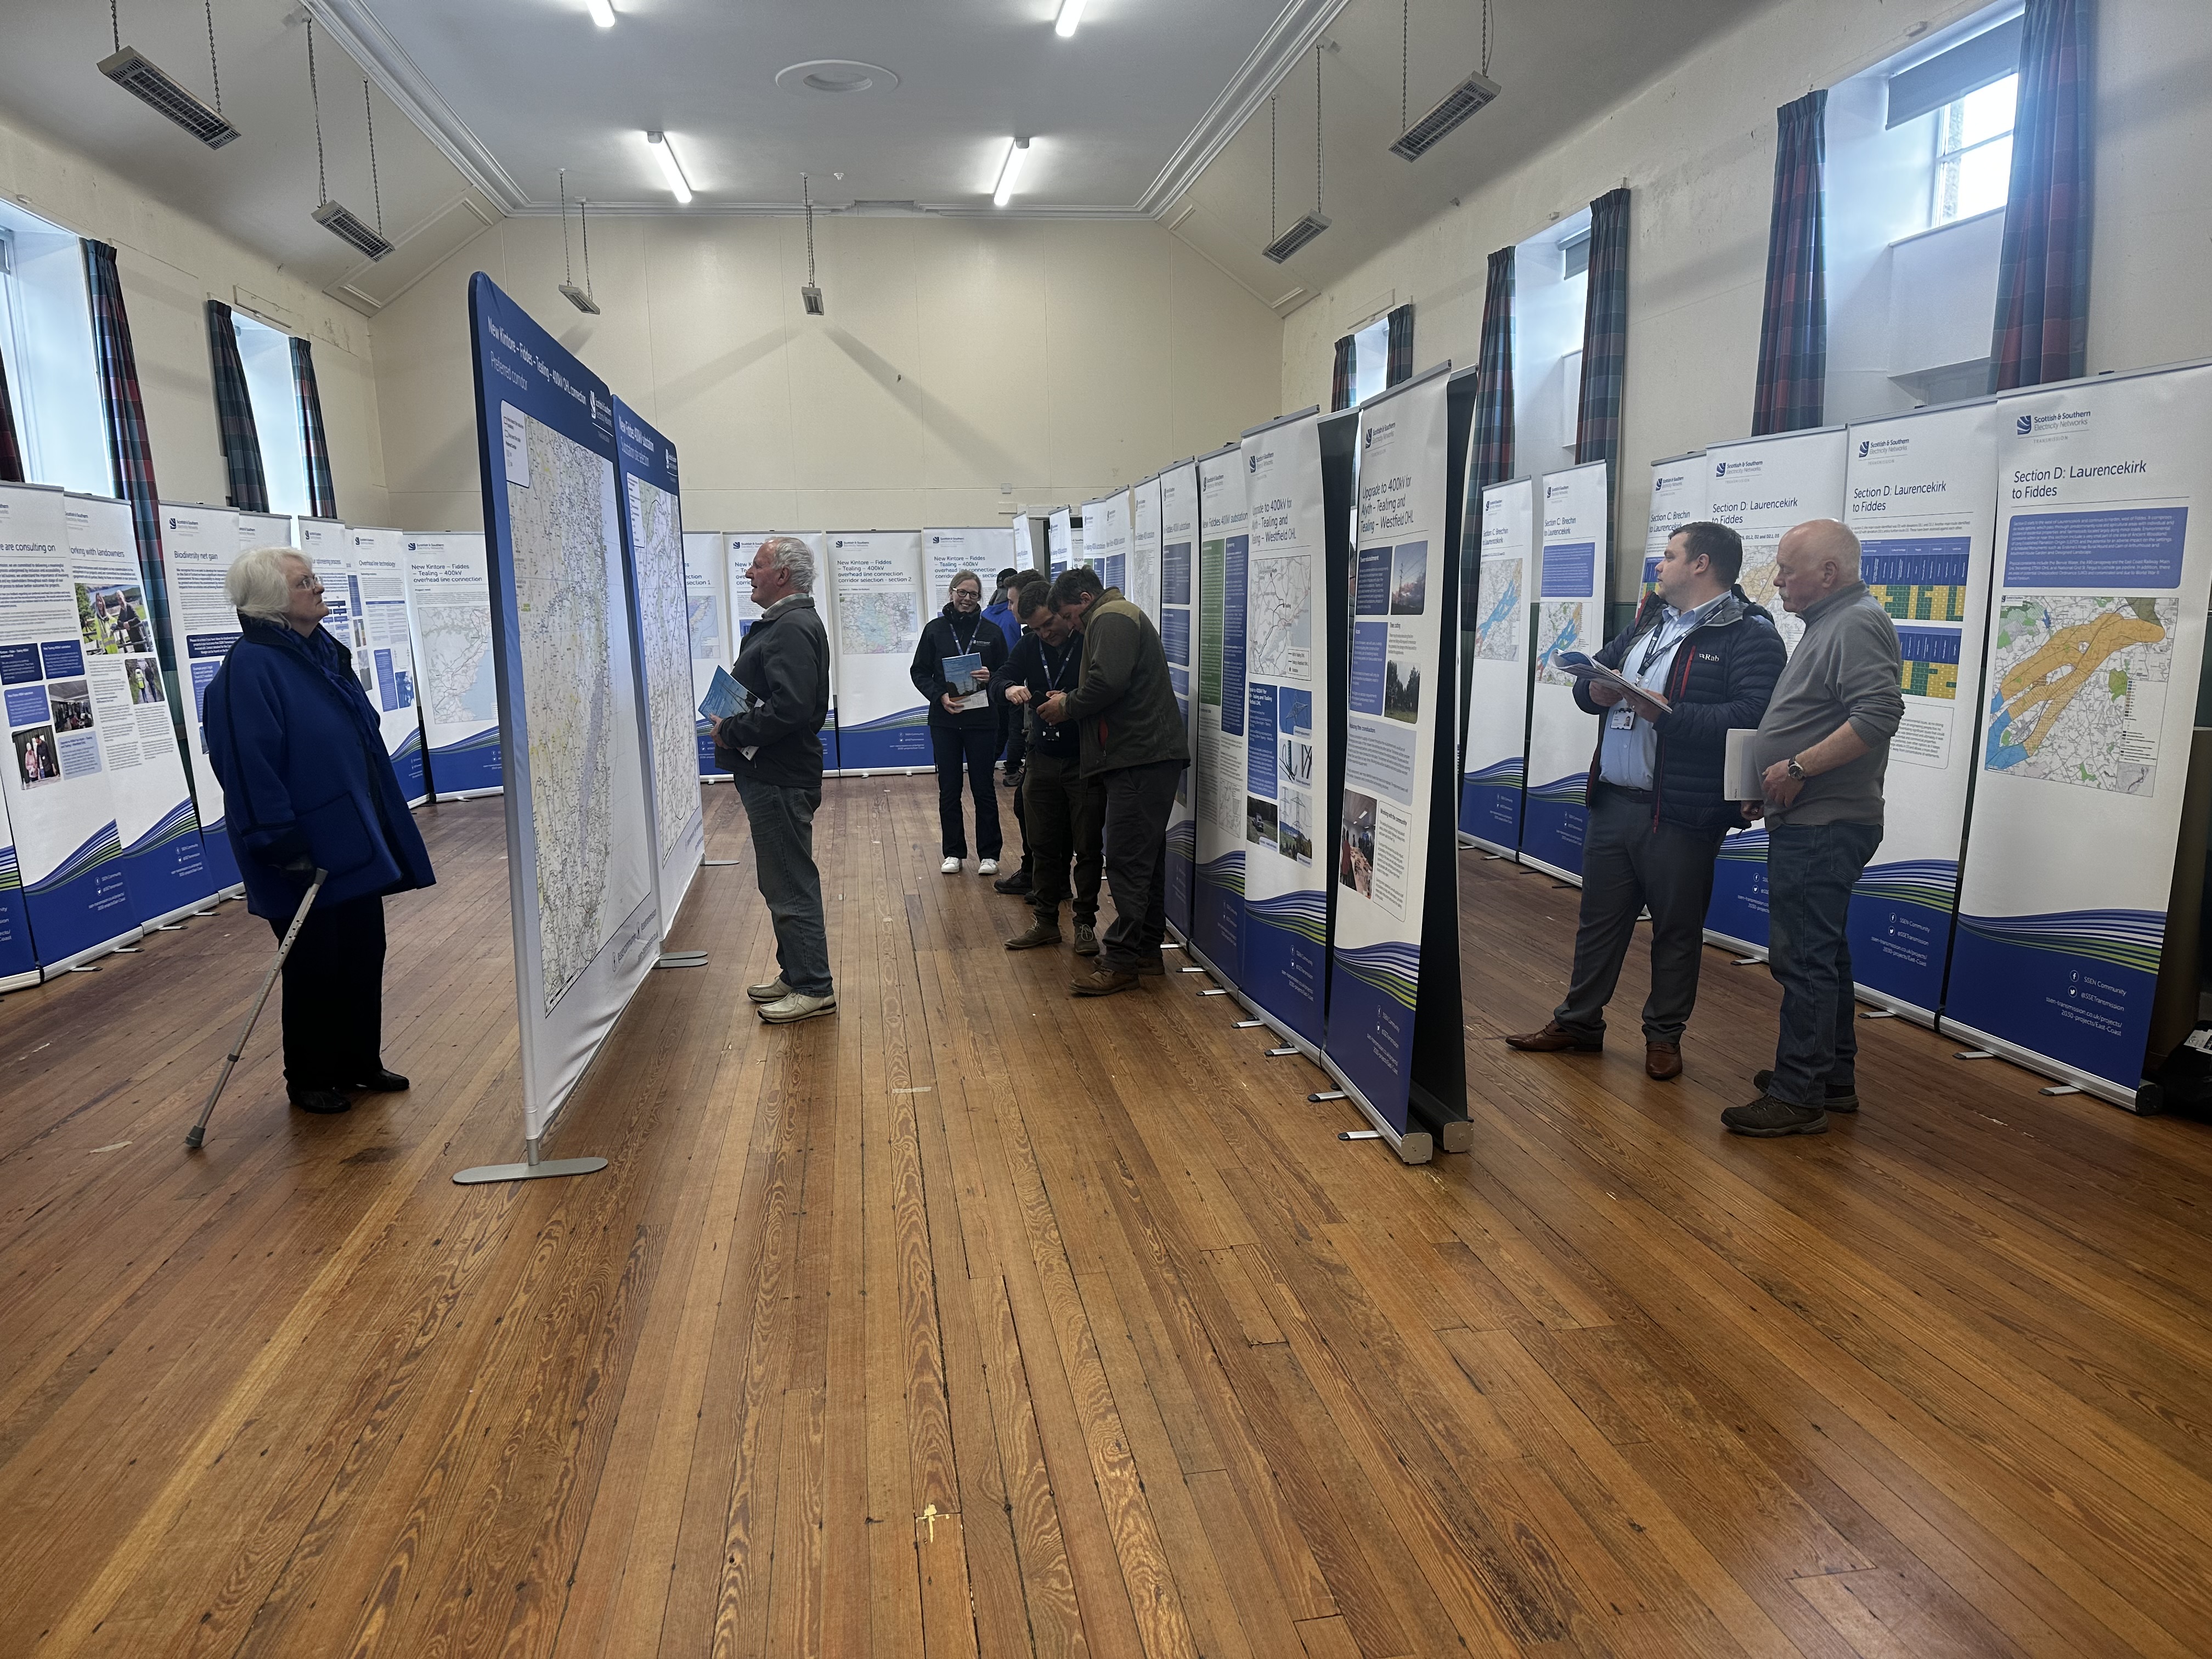 Members of the public and SSEN Transmission employees examining project posters in a hall.